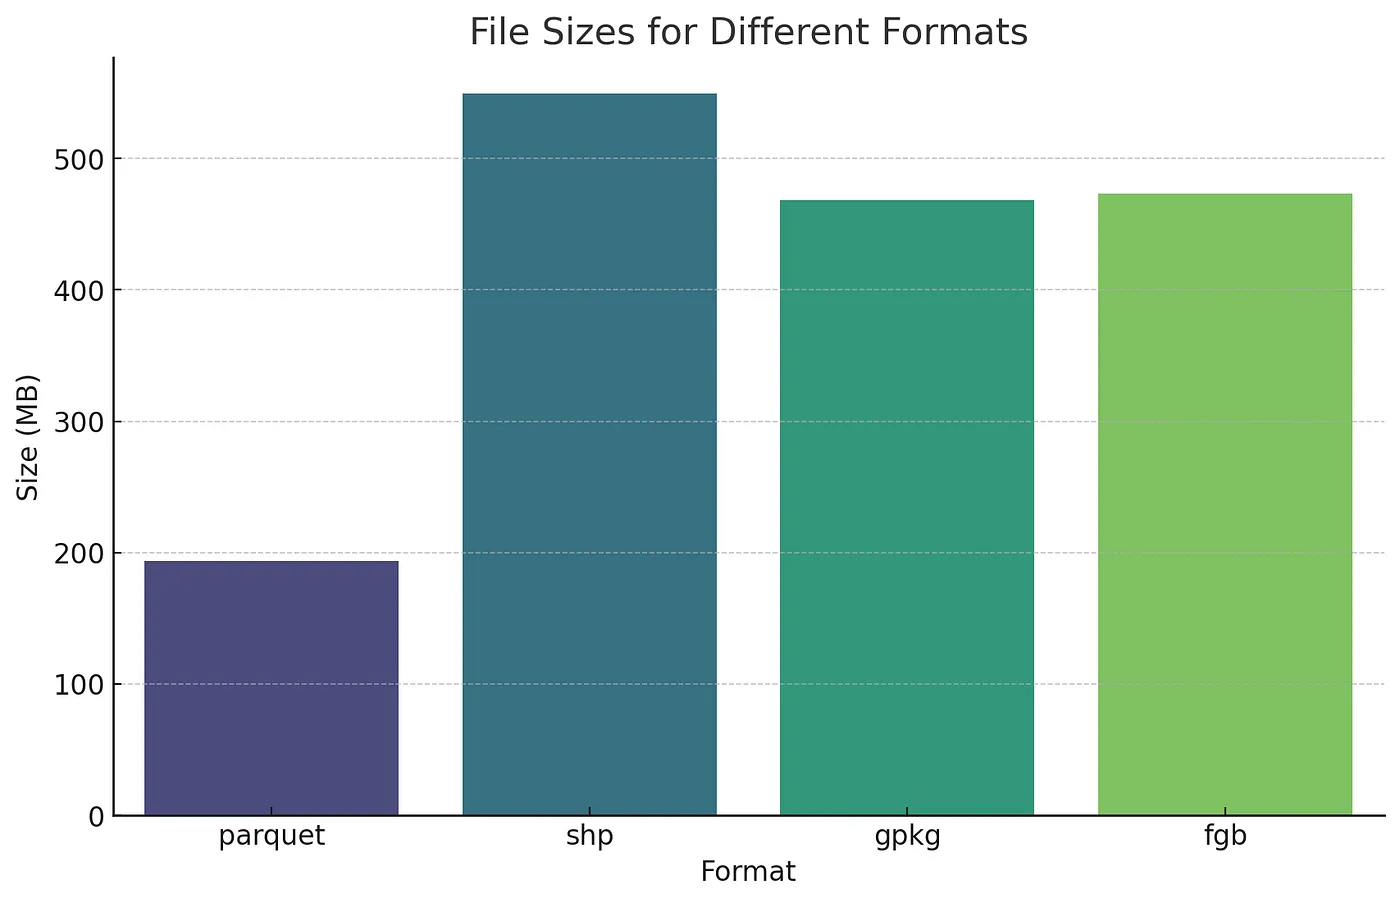 chart showing the GeoParquet file sizes are typically smaller than shp, gpkg, or fgb